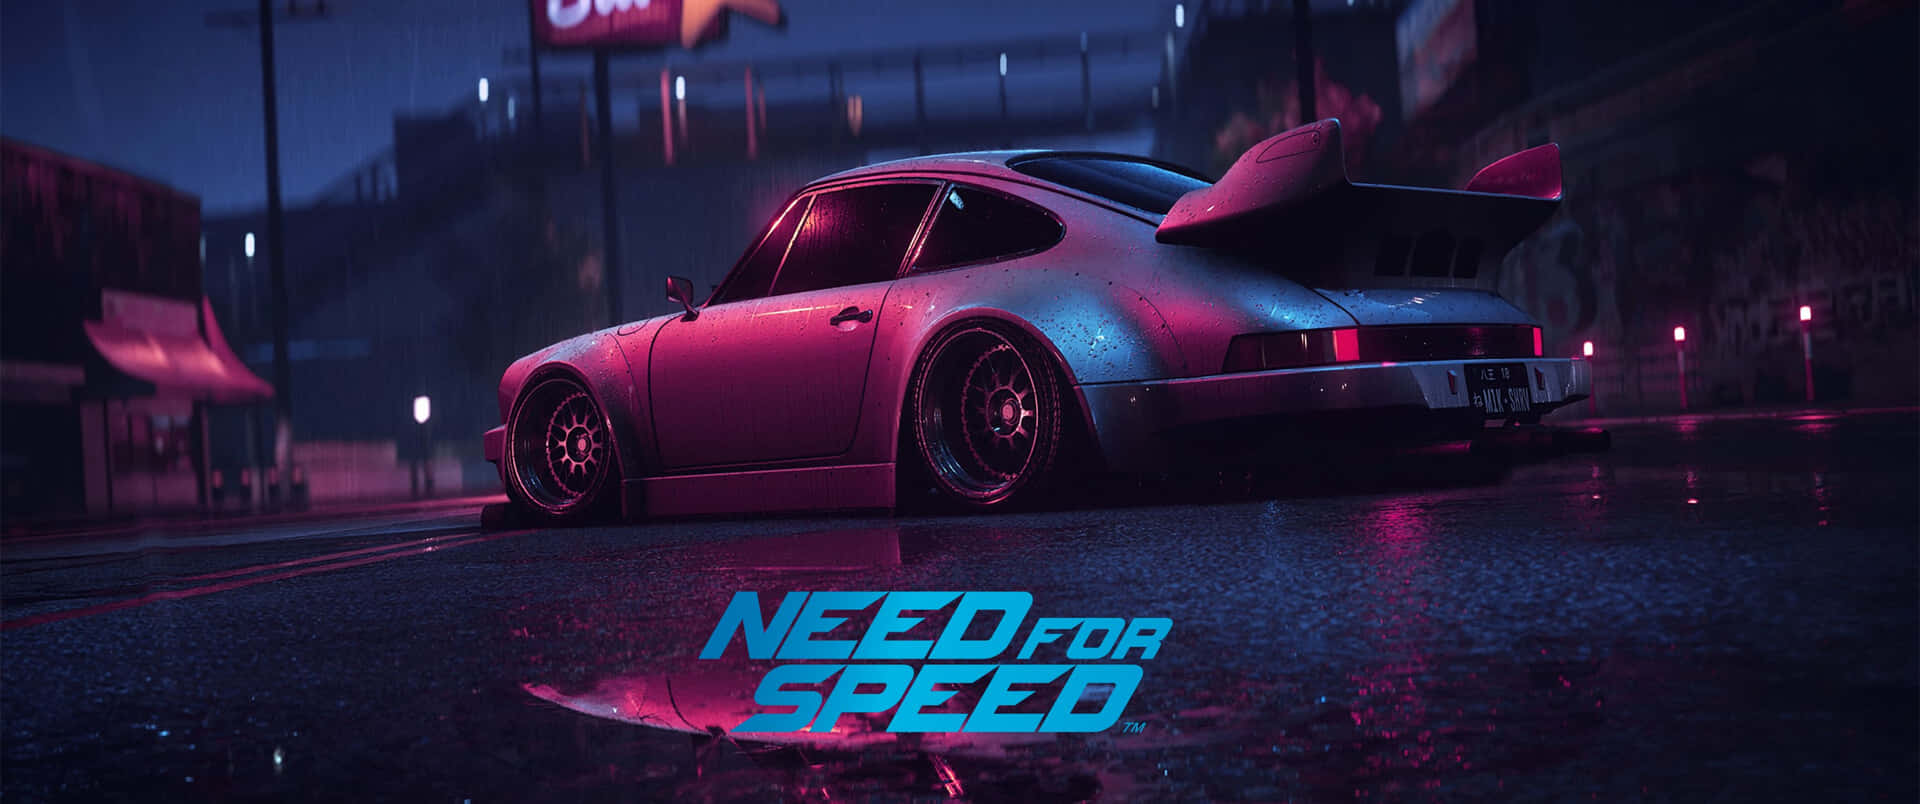 Need For Speed - Pc - Pc - Pc - Pc - Pc - P